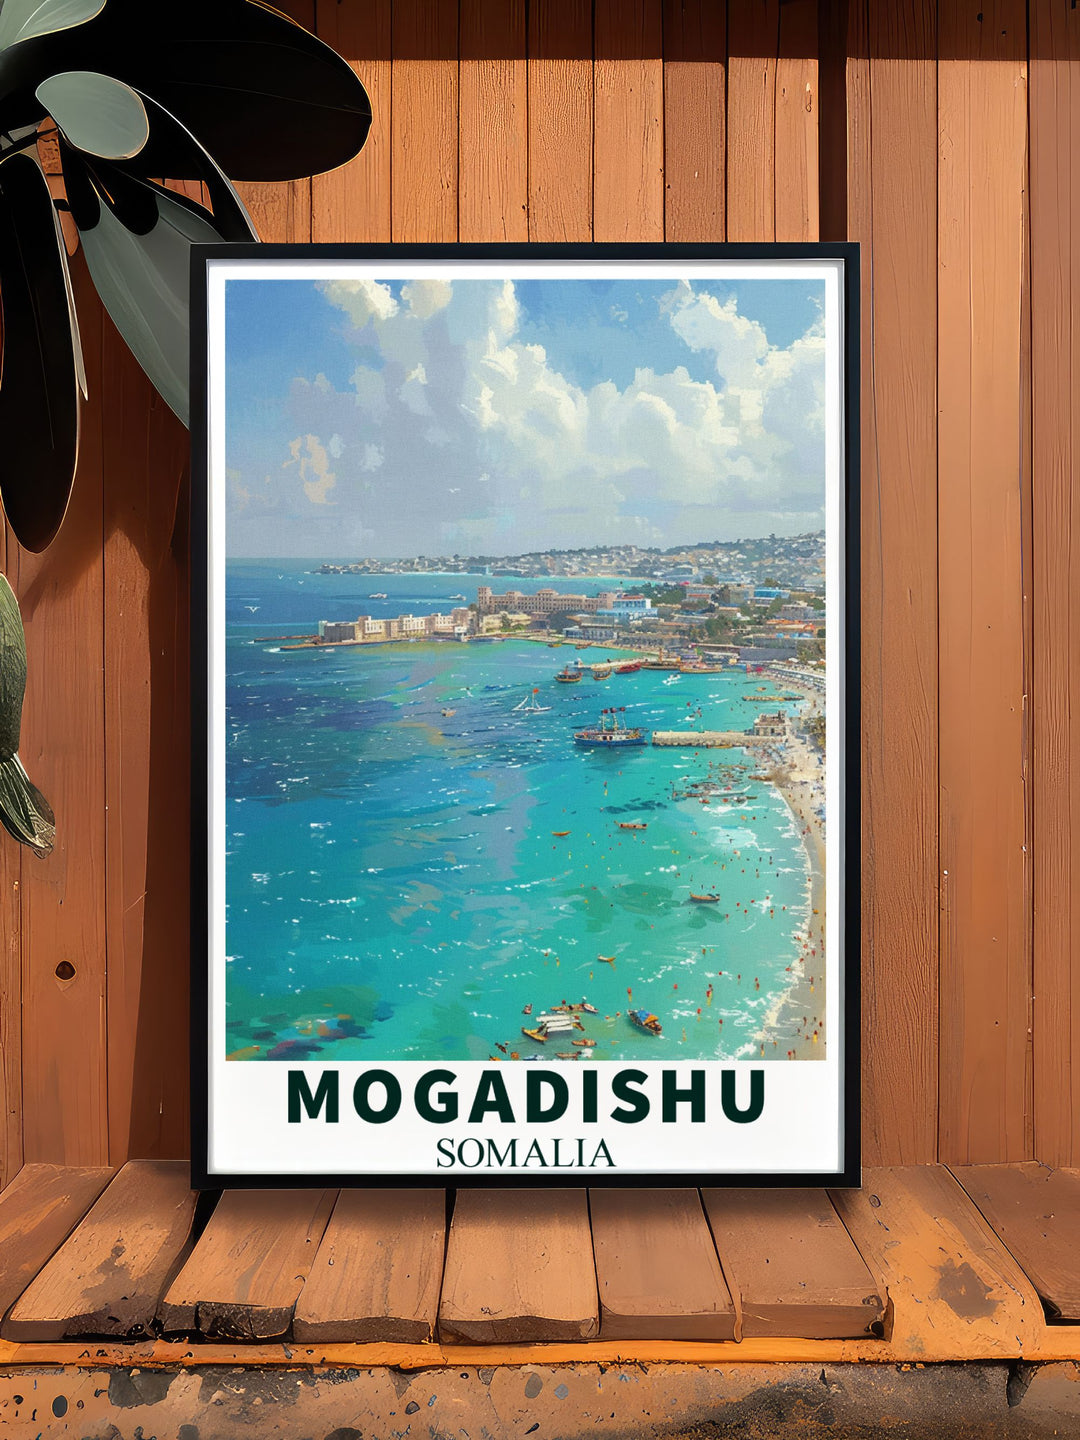 Lido Beach in Mogadishu is beautifully illustrated in this poster, showcasing its historical significance and natural beauty, perfect for art lovers and history enthusiasts.